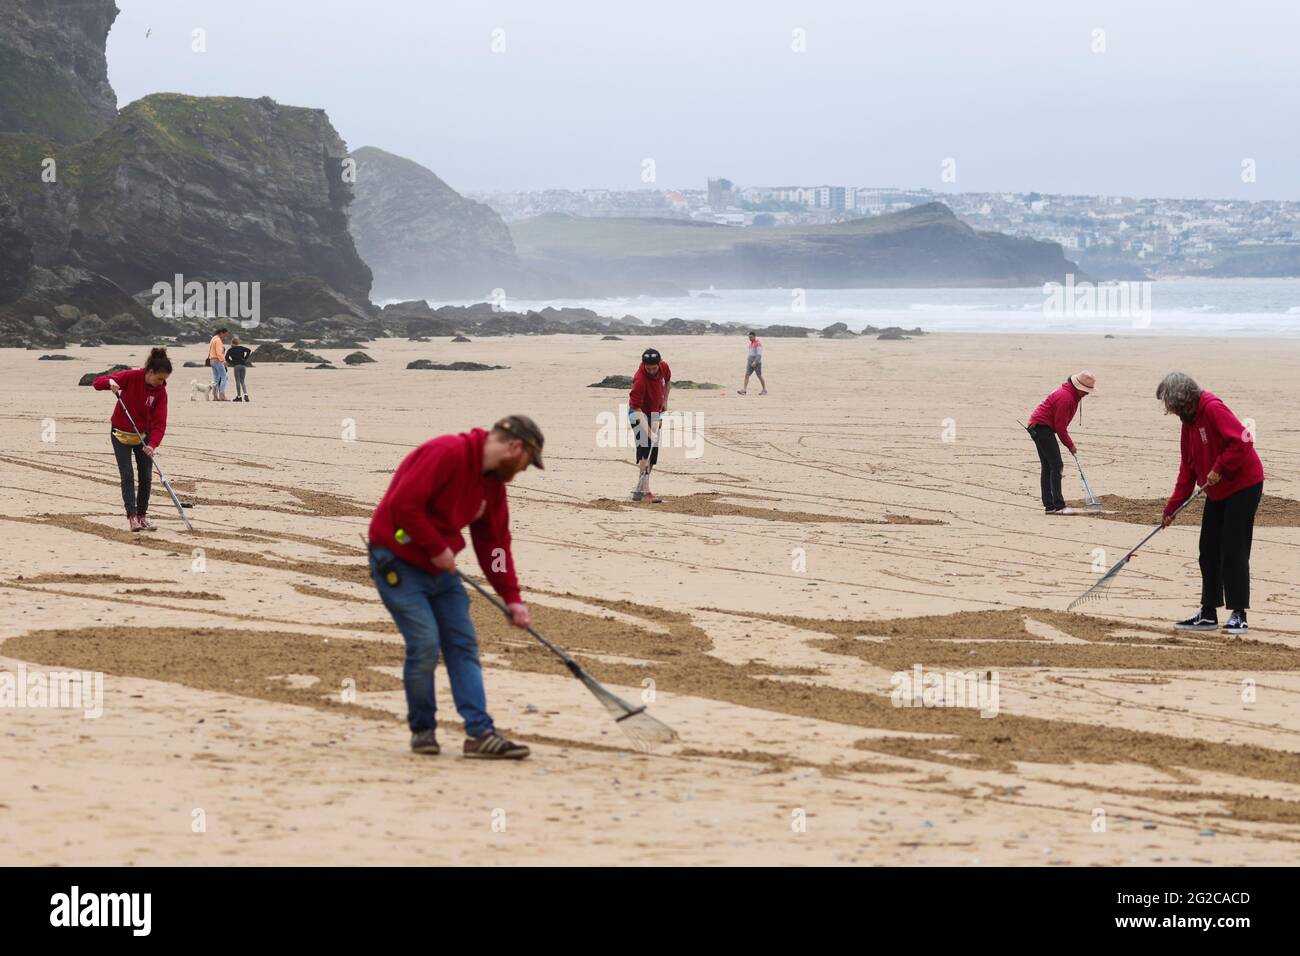 Campaign group Avaaz work to create a giant beach sand artwork depicting the faces of the G7 leaders alongside a message written in the sand reading 'Share the Vaccine, Waive the Patents', at Watergate Bay Beach, Newquay, Britain, June 10, 2021. REUTERS/Tom Nicholson Stock Photo